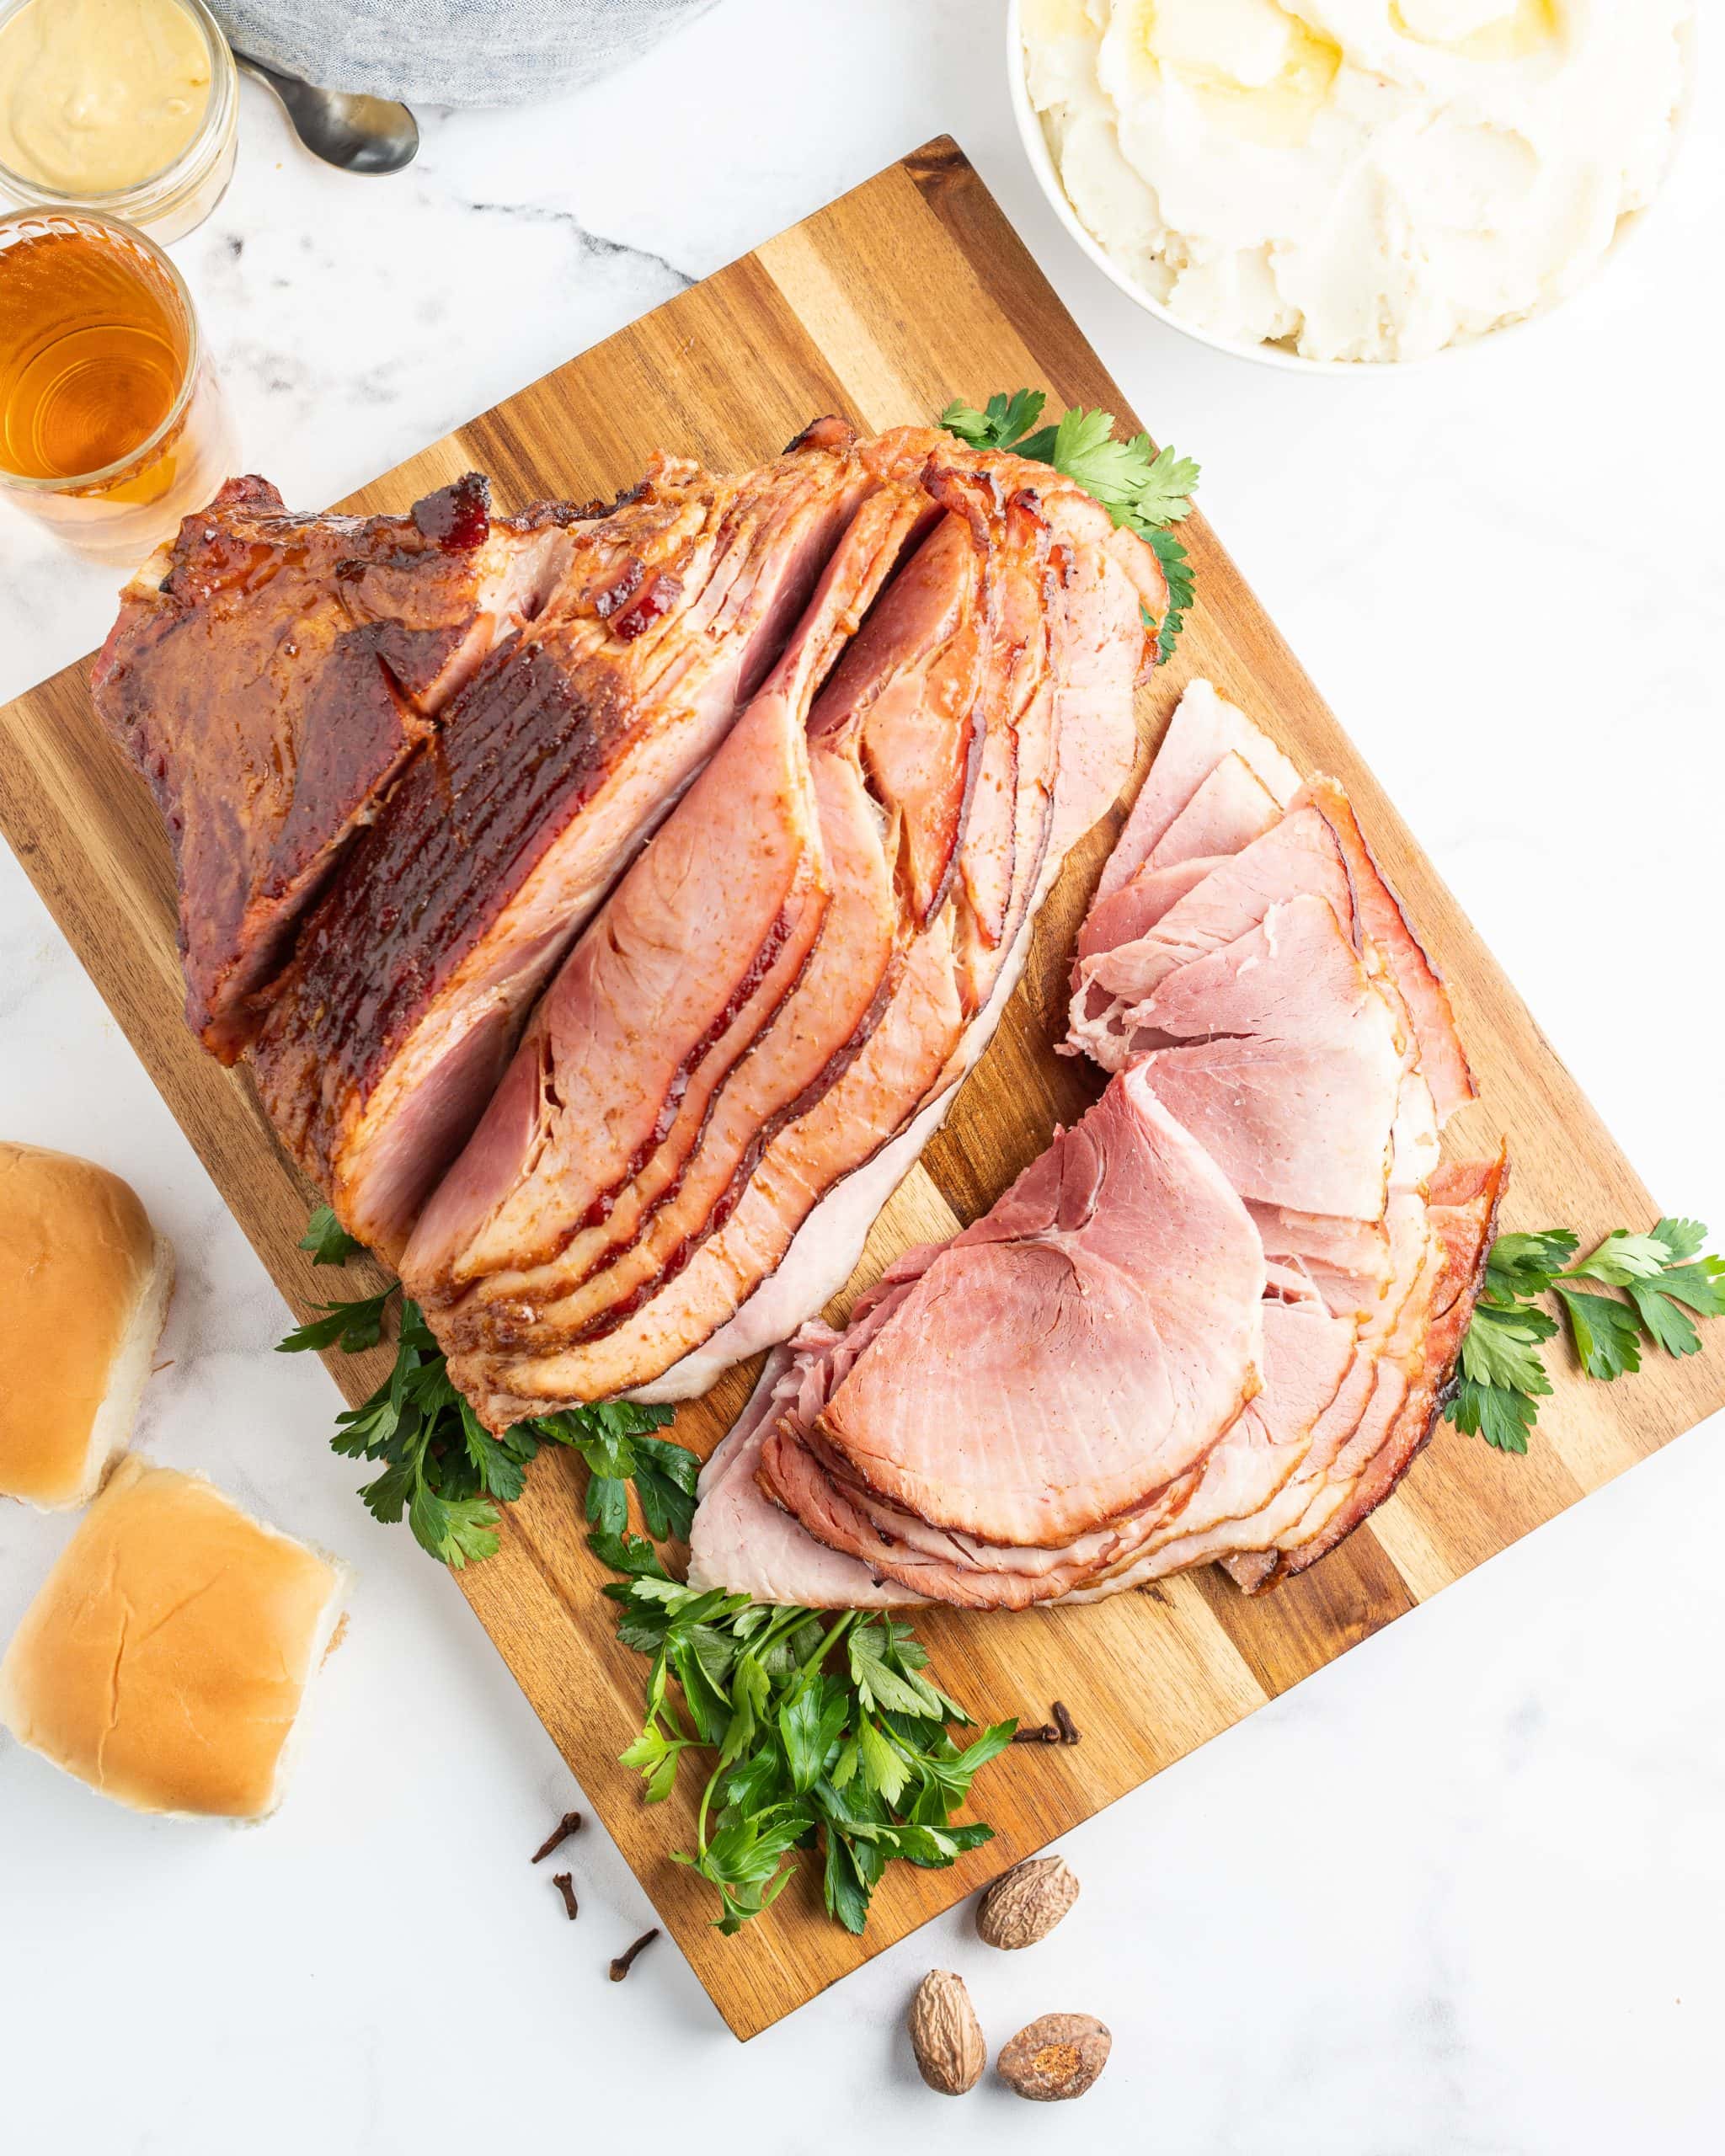 An overhead shot of a maple glazed ham on a cutting board, some of the pieces are cut off and laying in front of the ham on the board.